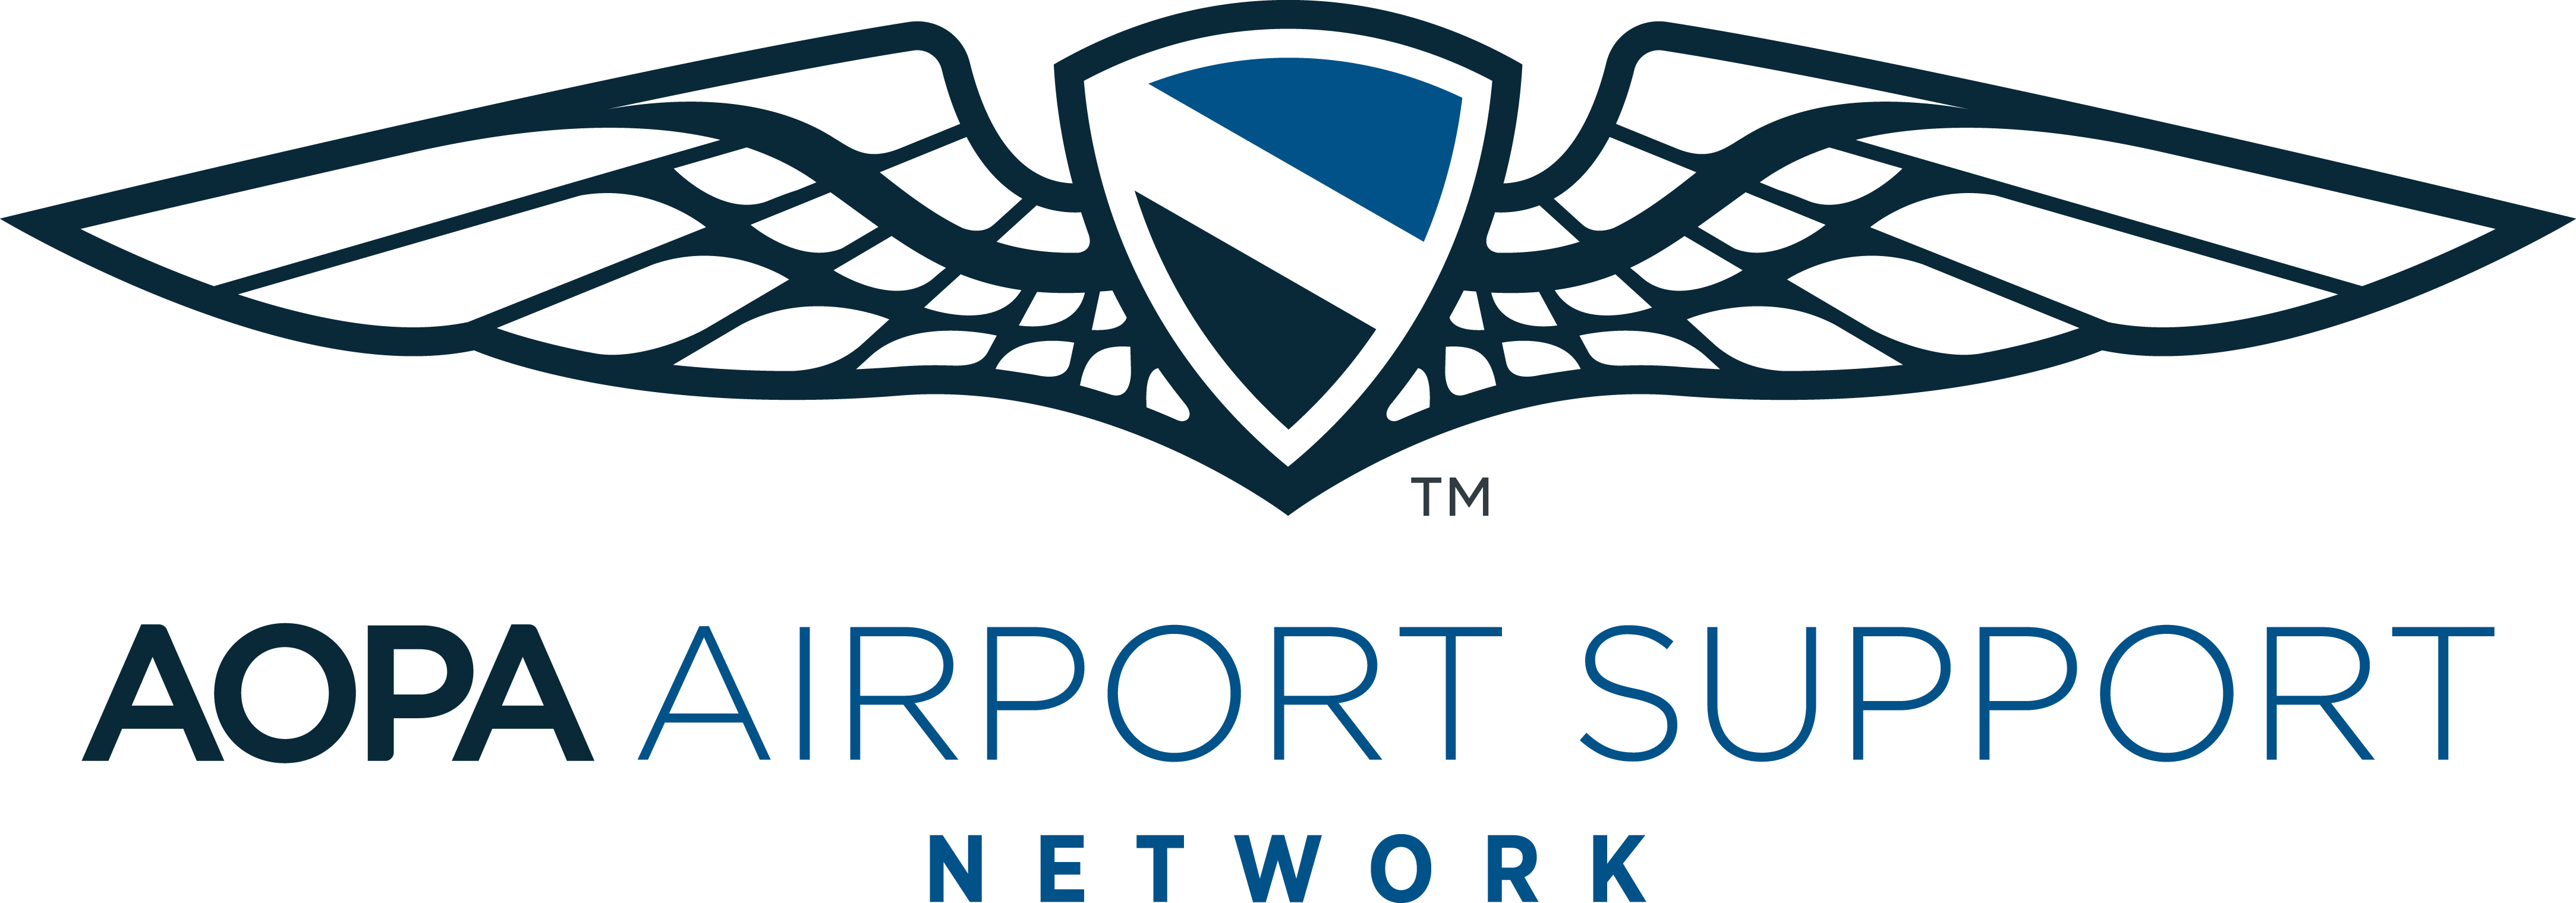 Airport Support Network